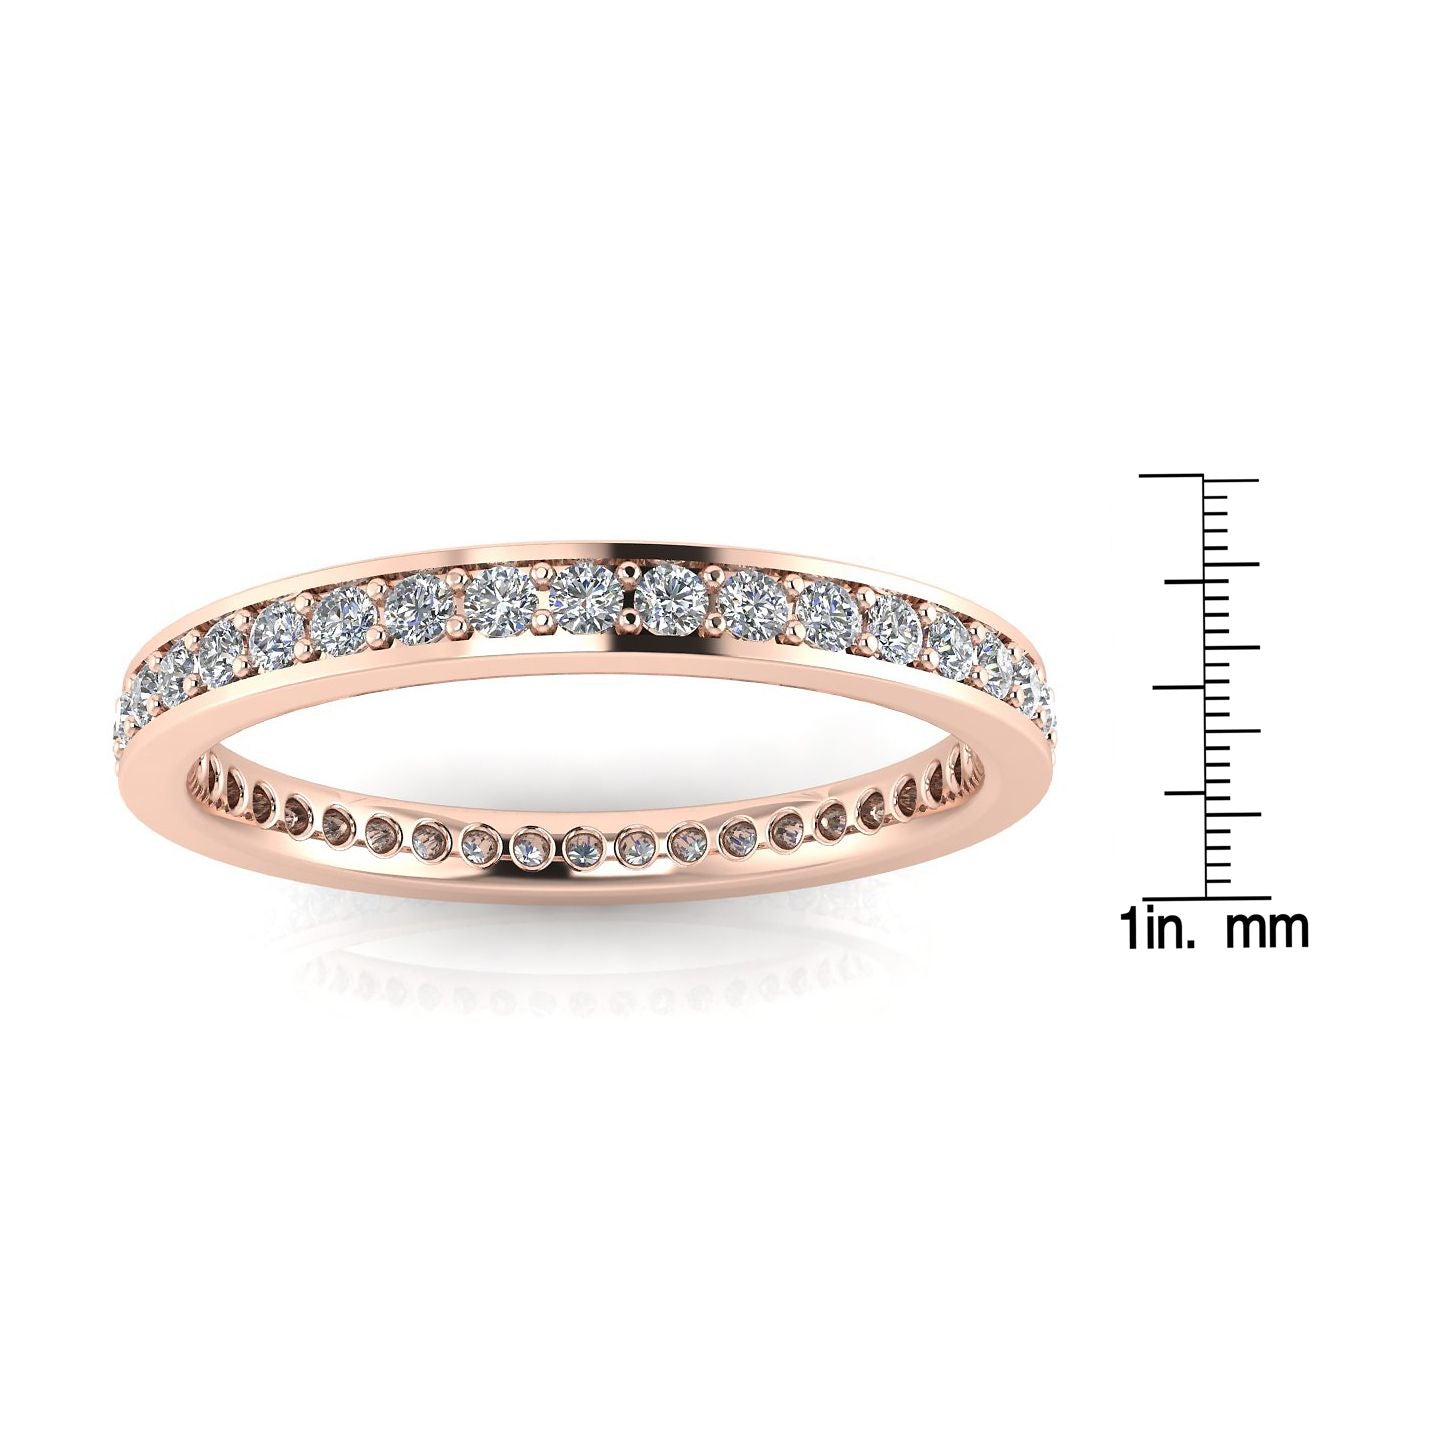 Round Brilliant Cut Diamond Channel Pave Set Eternity Ring In 14k Rose Gold  (0.31ct. Tw.) Ring Size 6